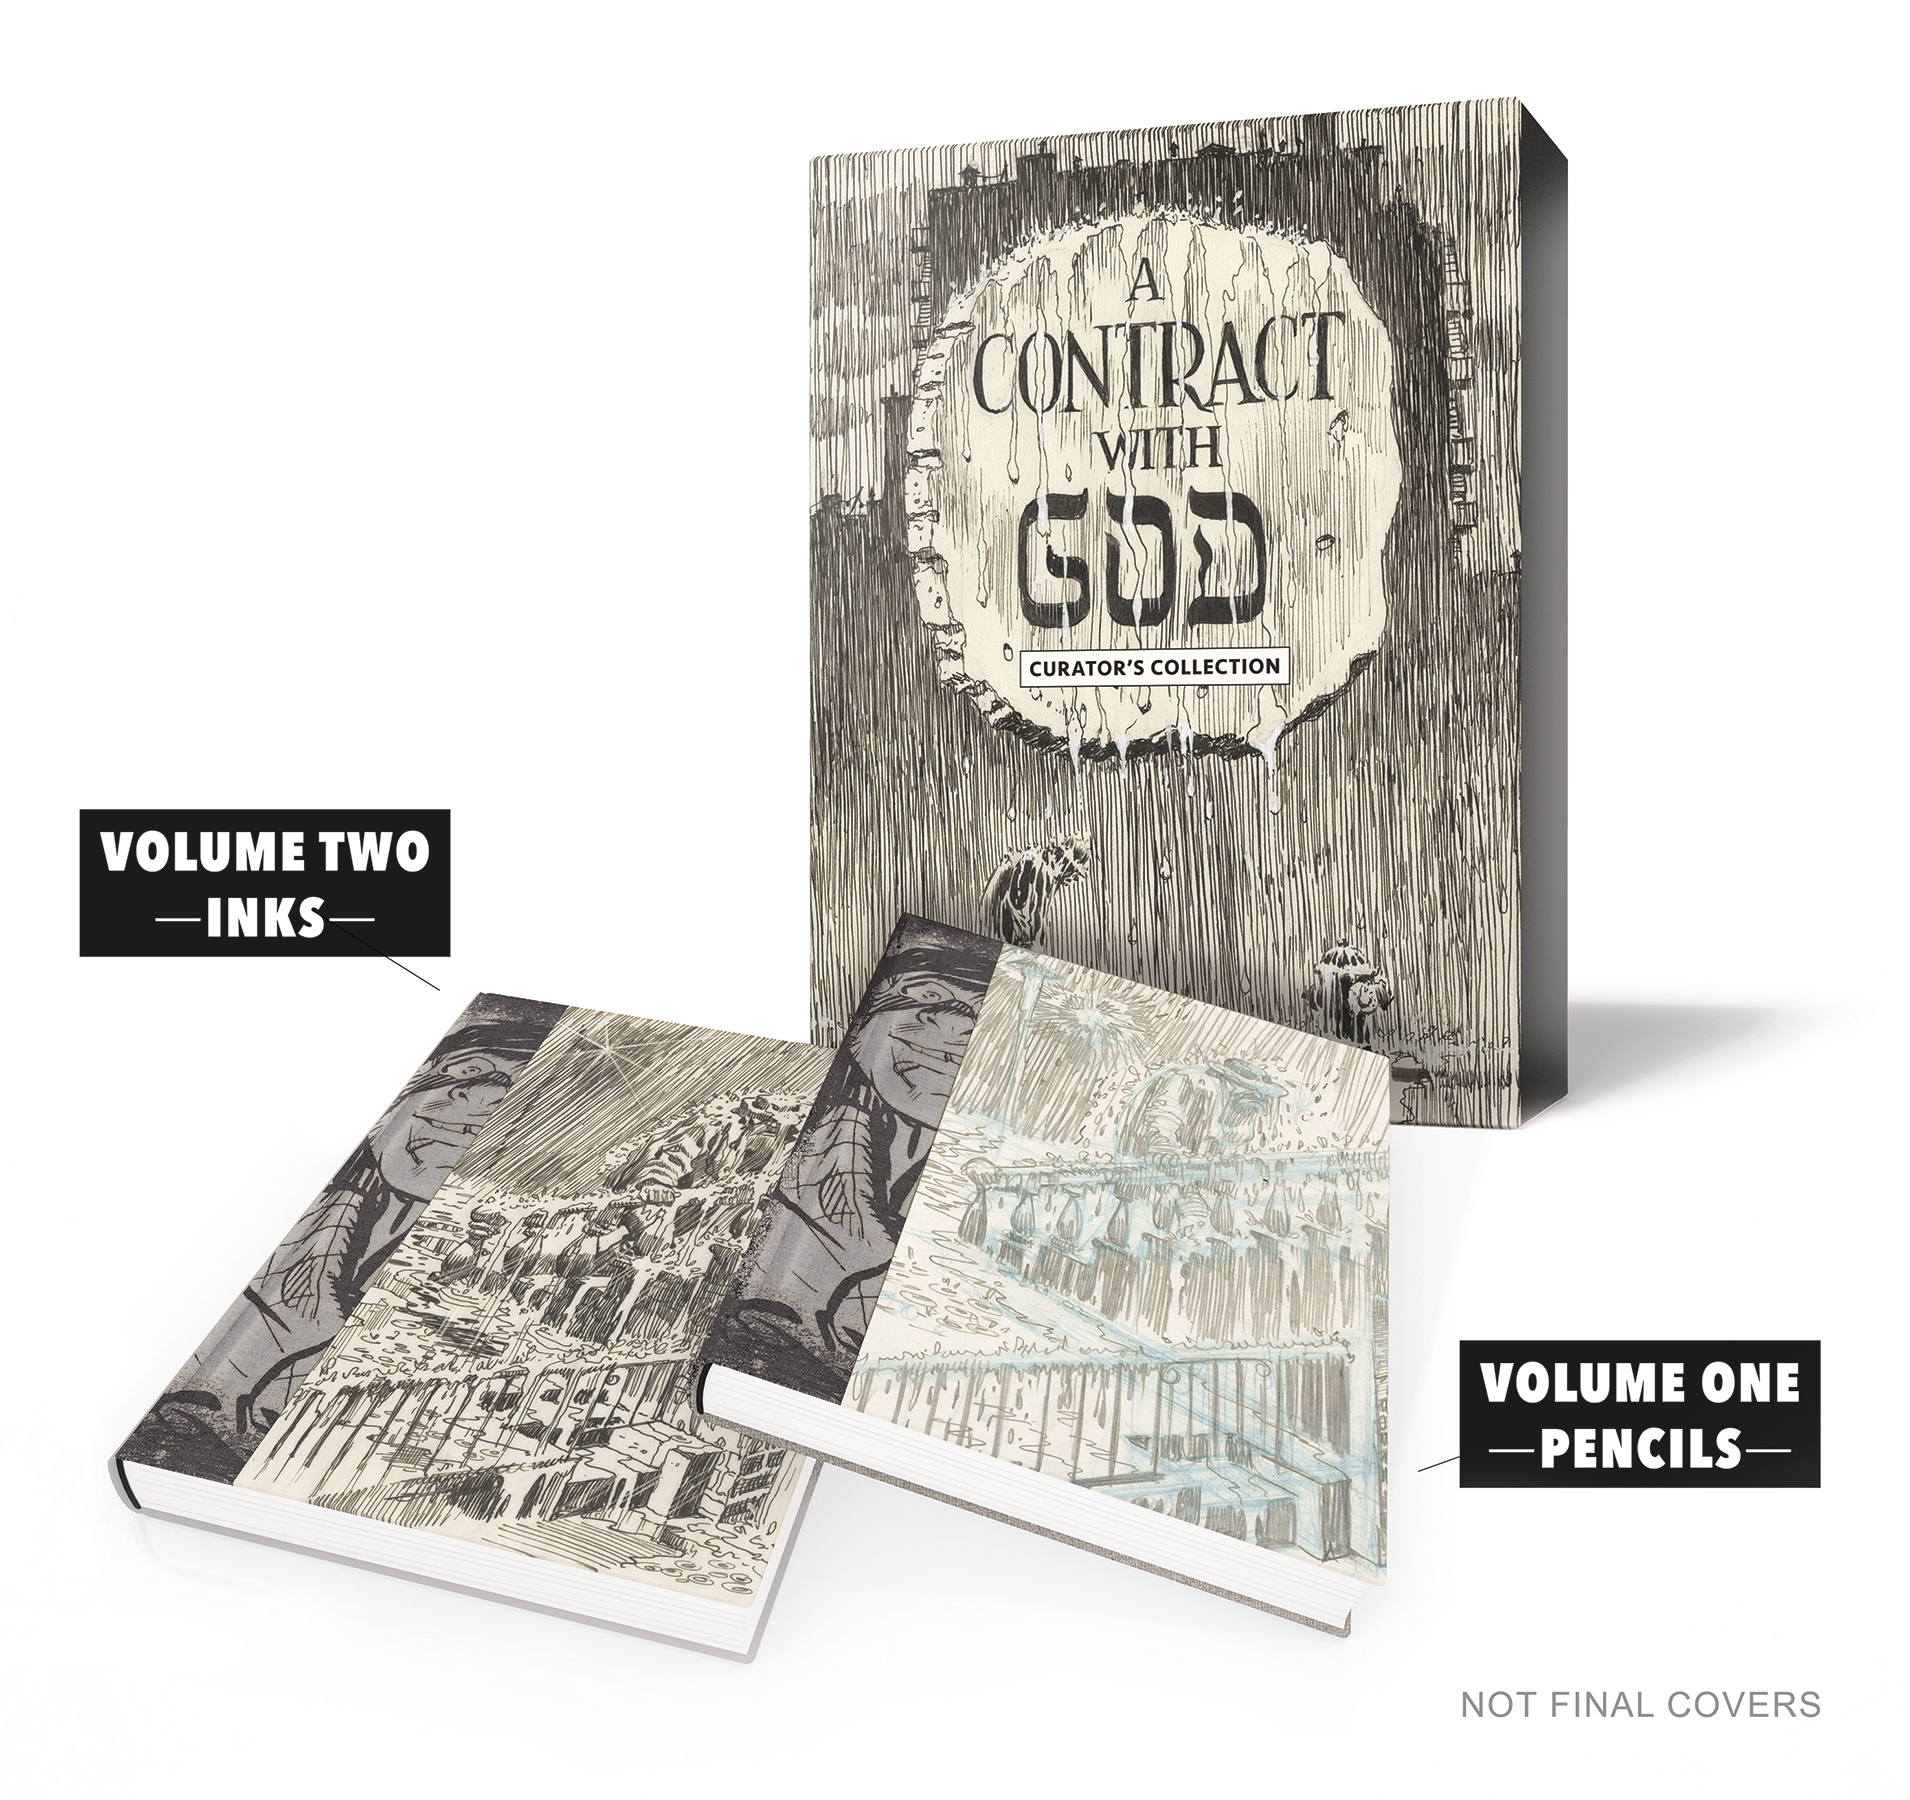 WILL EISNER CONTRACT WITH GOD CURATORS COLL HC